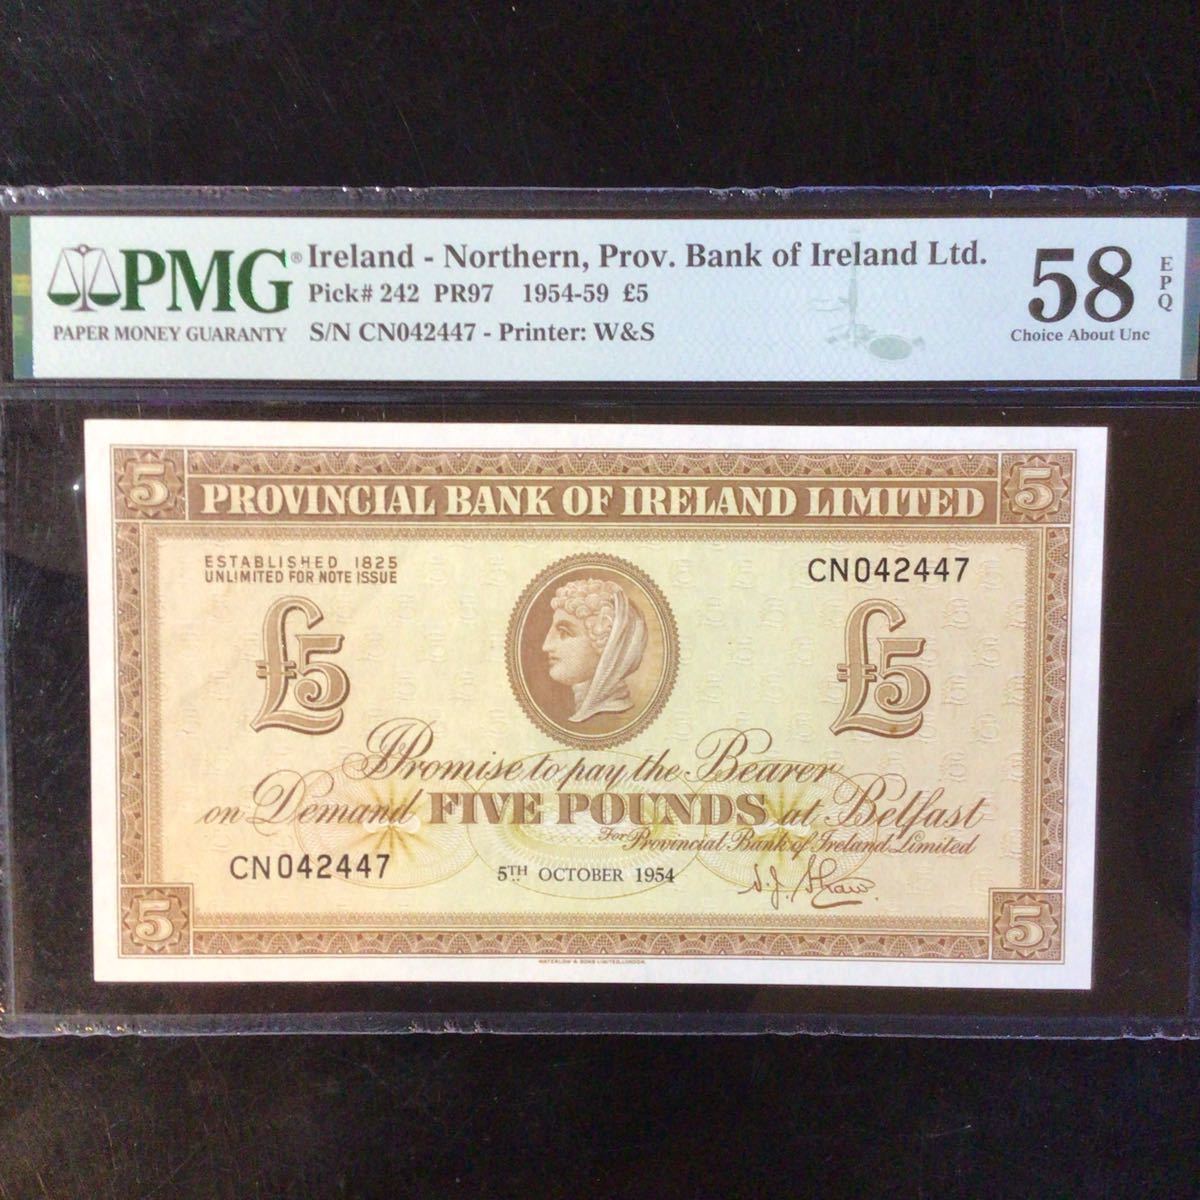 World Banknote Grading NORTHERN IRELAND《Provincial Bank of Ireland Ltd.》5 Pounds【1954】『PMG Grading Choice About Unc 58 EPQ』